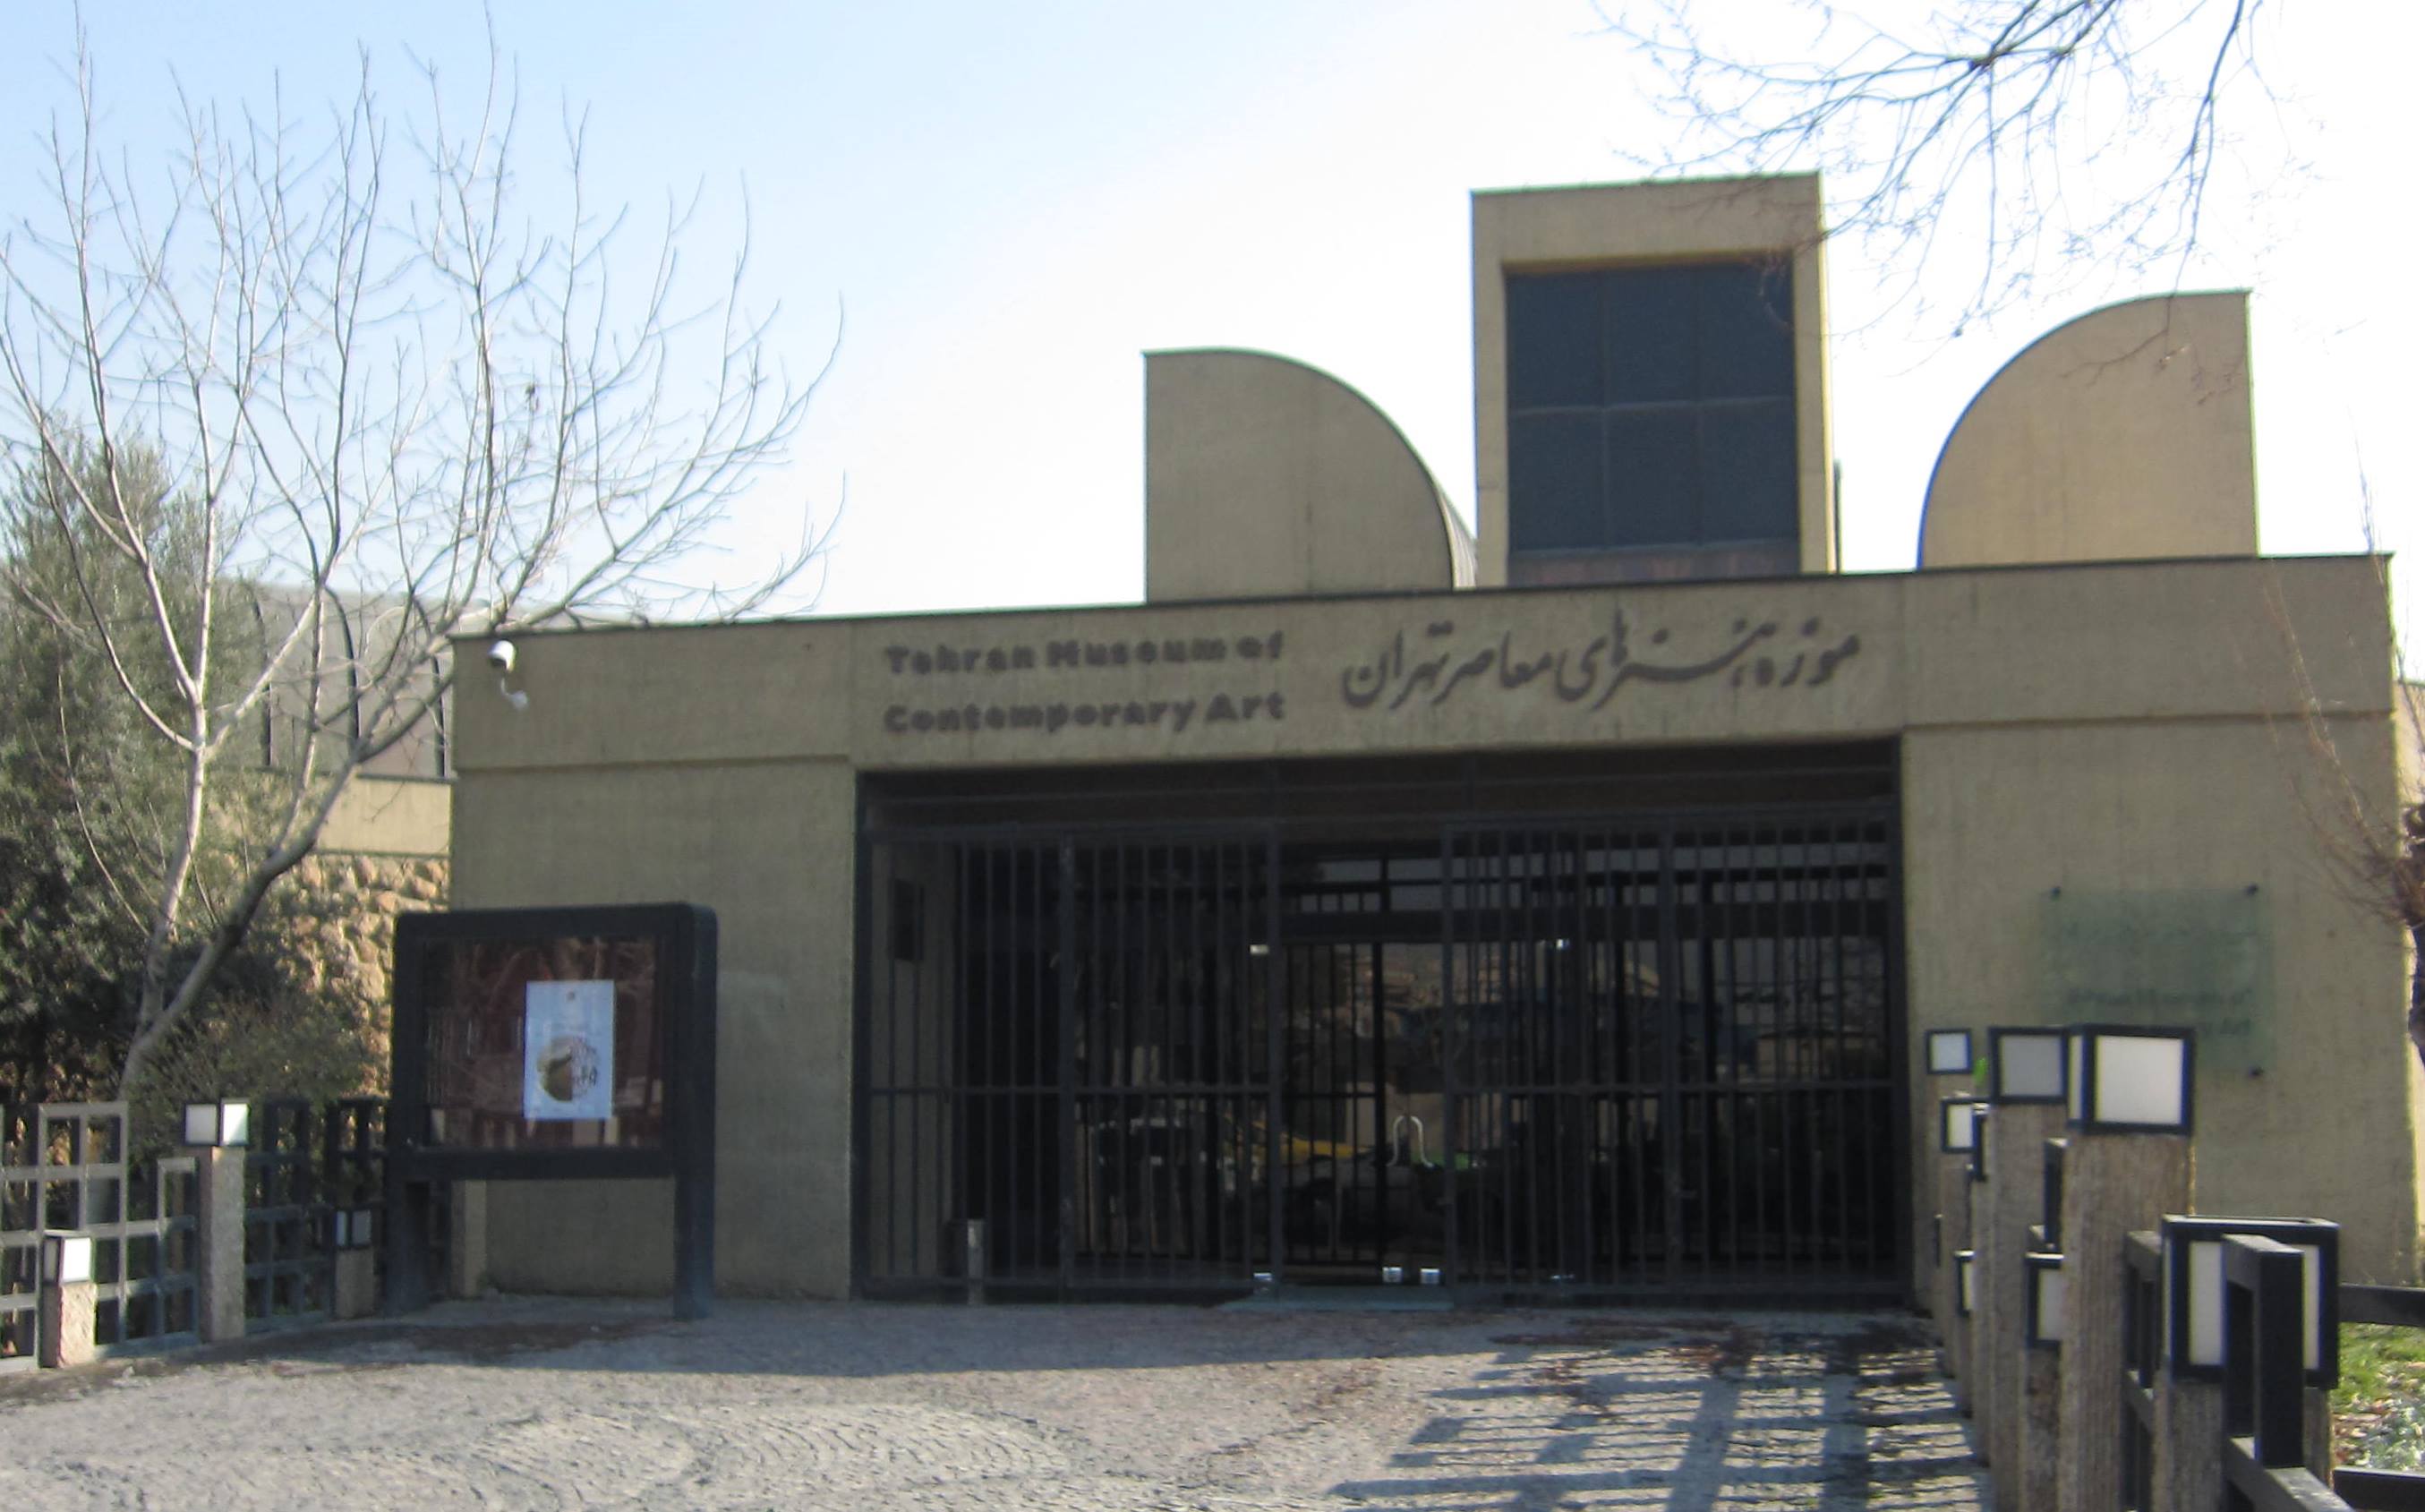 Exterior of the Tehran Museum of Contemporary Art, photographed in January 2015. Museum officials announced on August 17 that it has closed temporarily to deal with an infestation of silverfish, a paper-eating bug. Image courtesy of Wikimedia Commons, photo credit MRG90. Shared under the Creative Commons Attribution-Share Alike 4.0 International license.